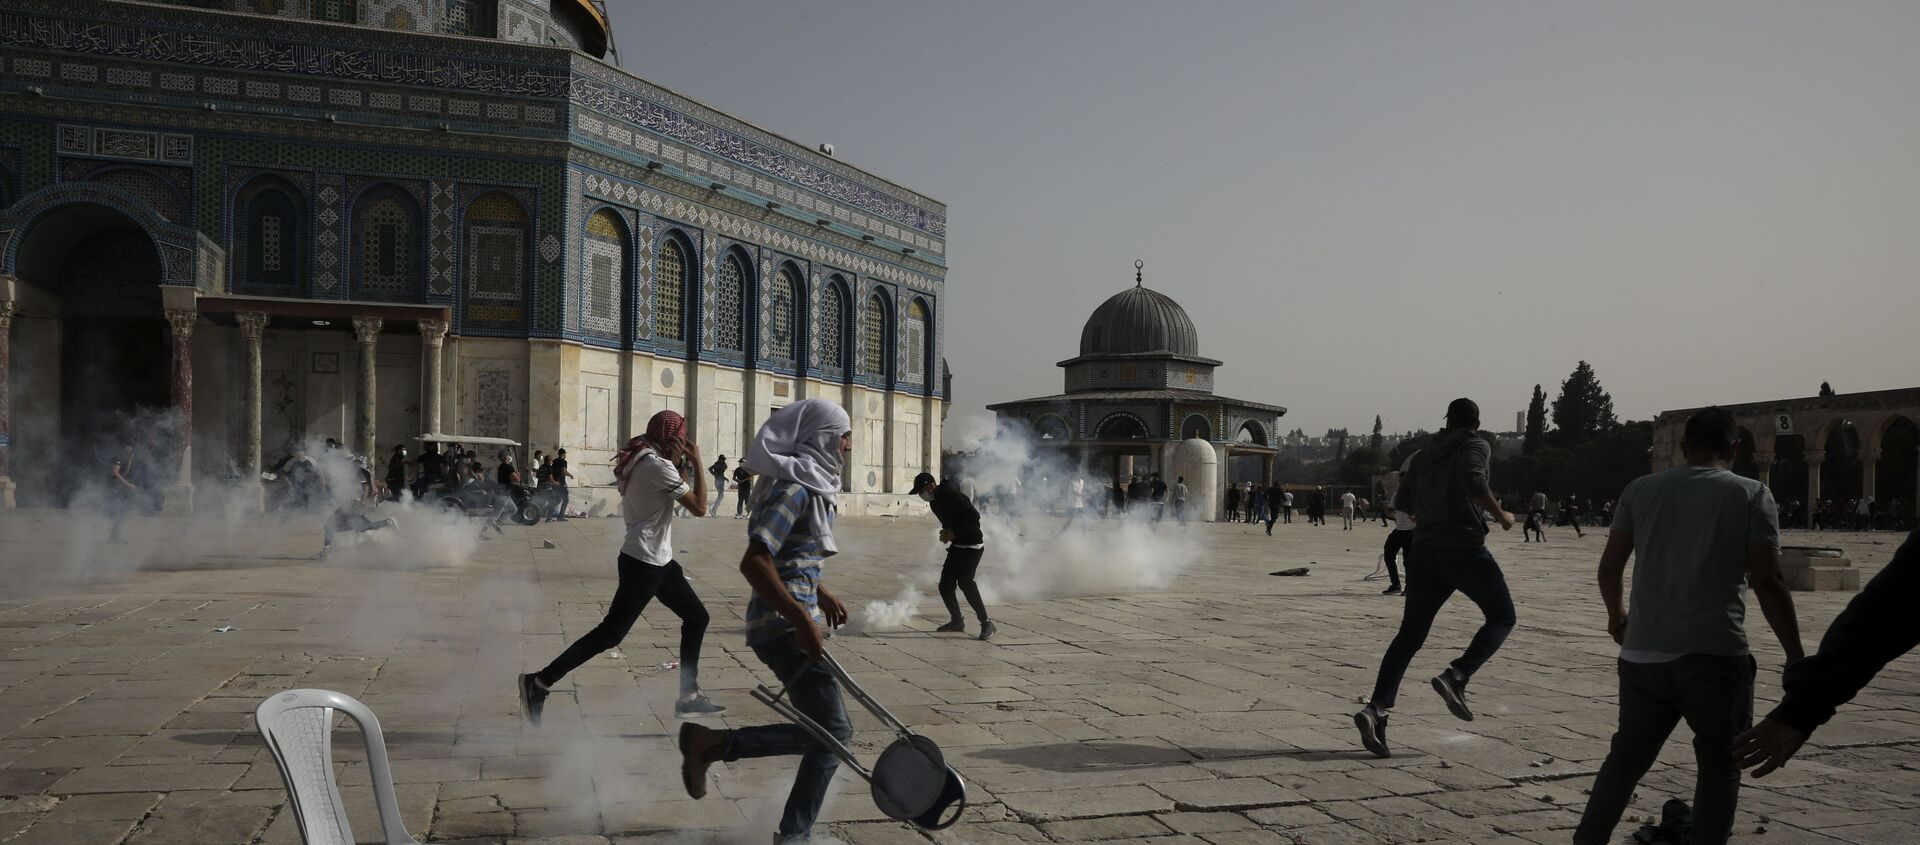 Palestinians run away from tear gas during clashes with Israeli security forces at the Al Aqsa Mosque compound in Jerusalem's Old City Monday, May 10, 2021 - Sputnik International, 1920